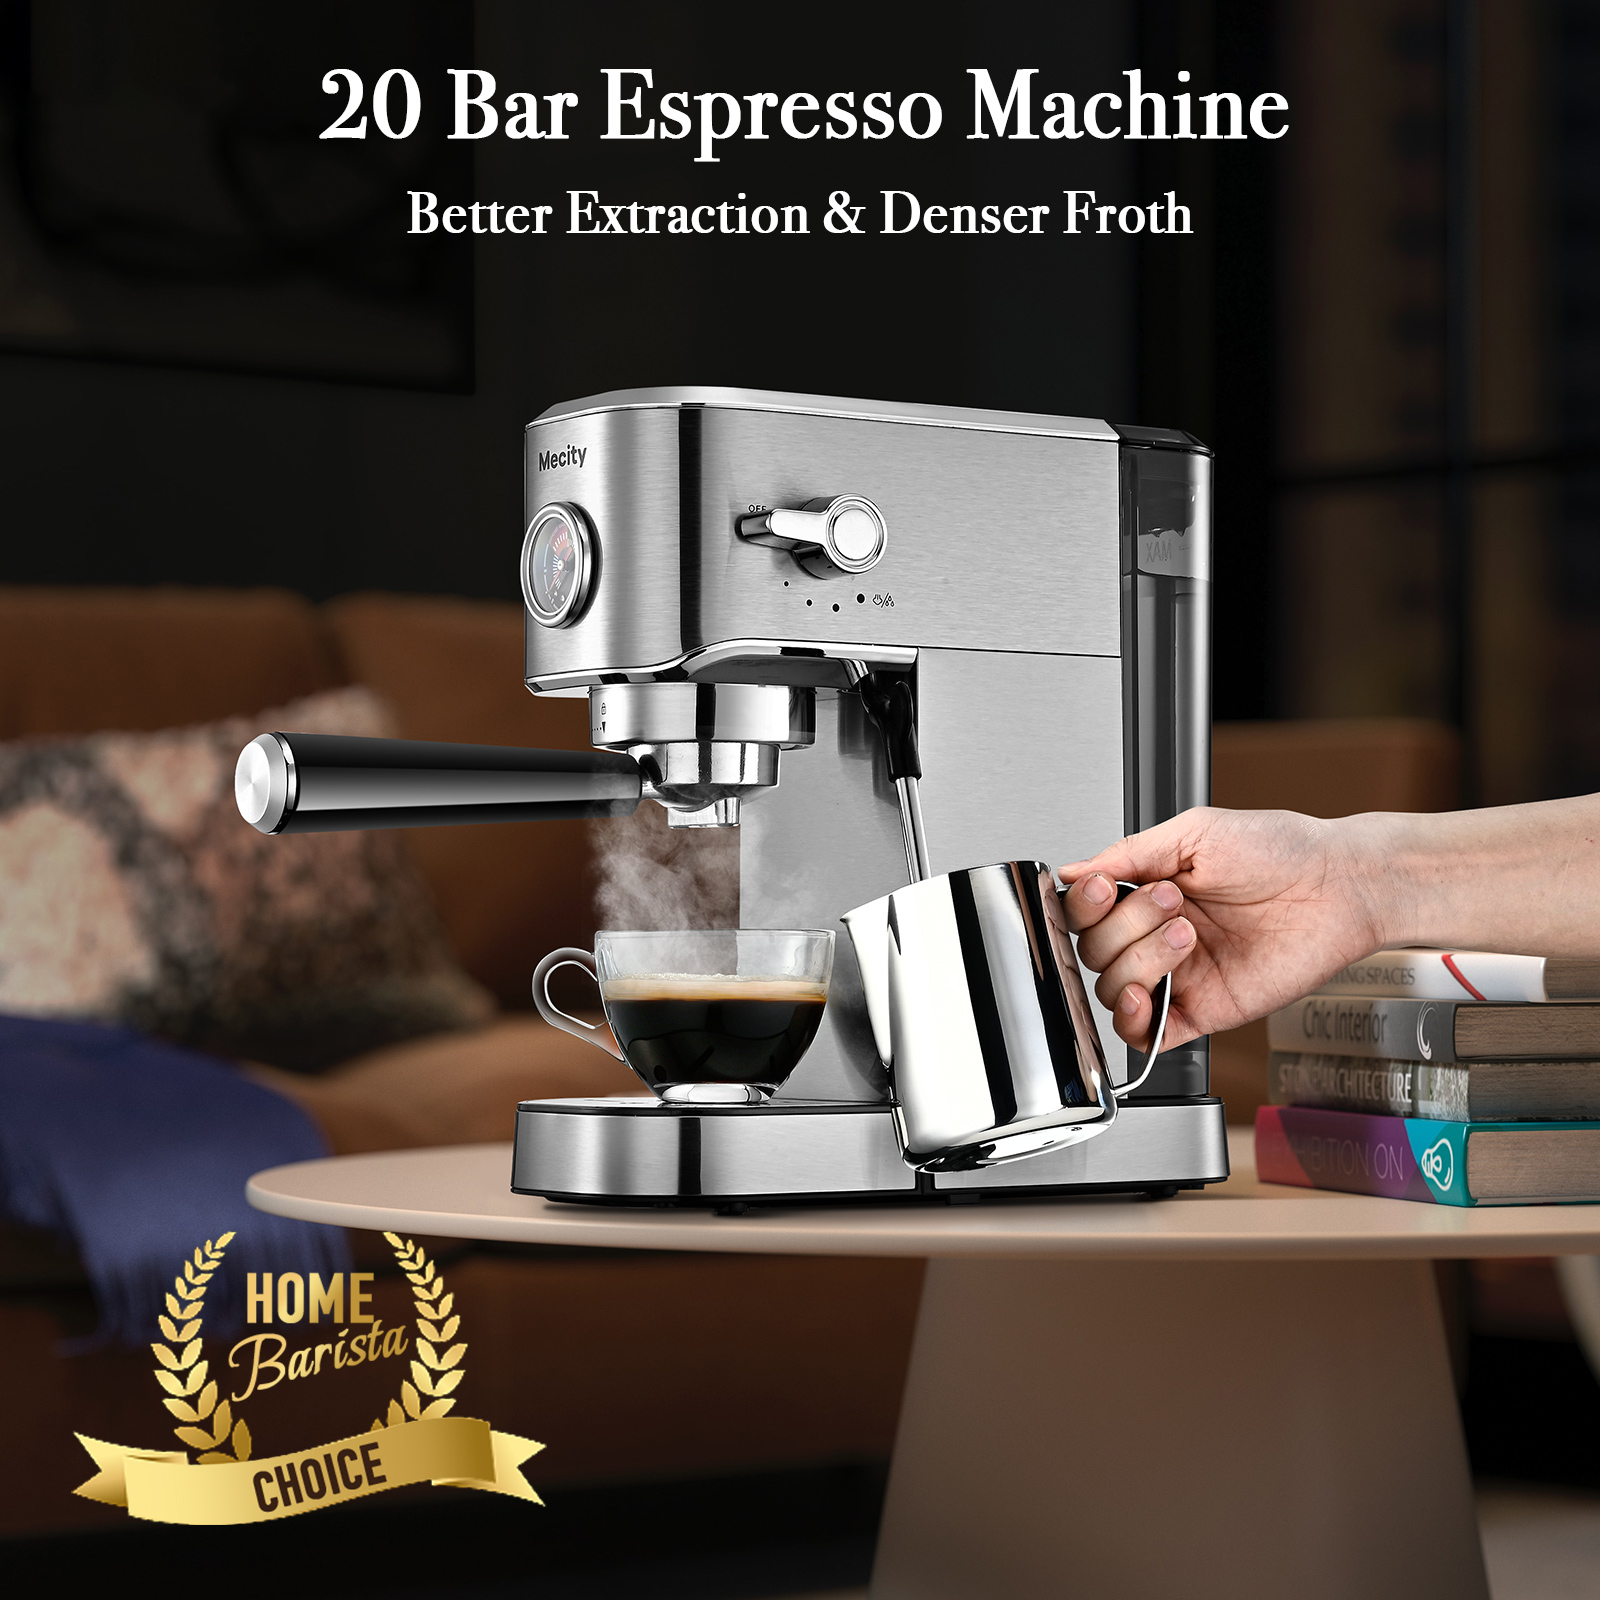 Mecity 20 Bar Espresso Machine With Frother, Compact Design, 37 Oz ...